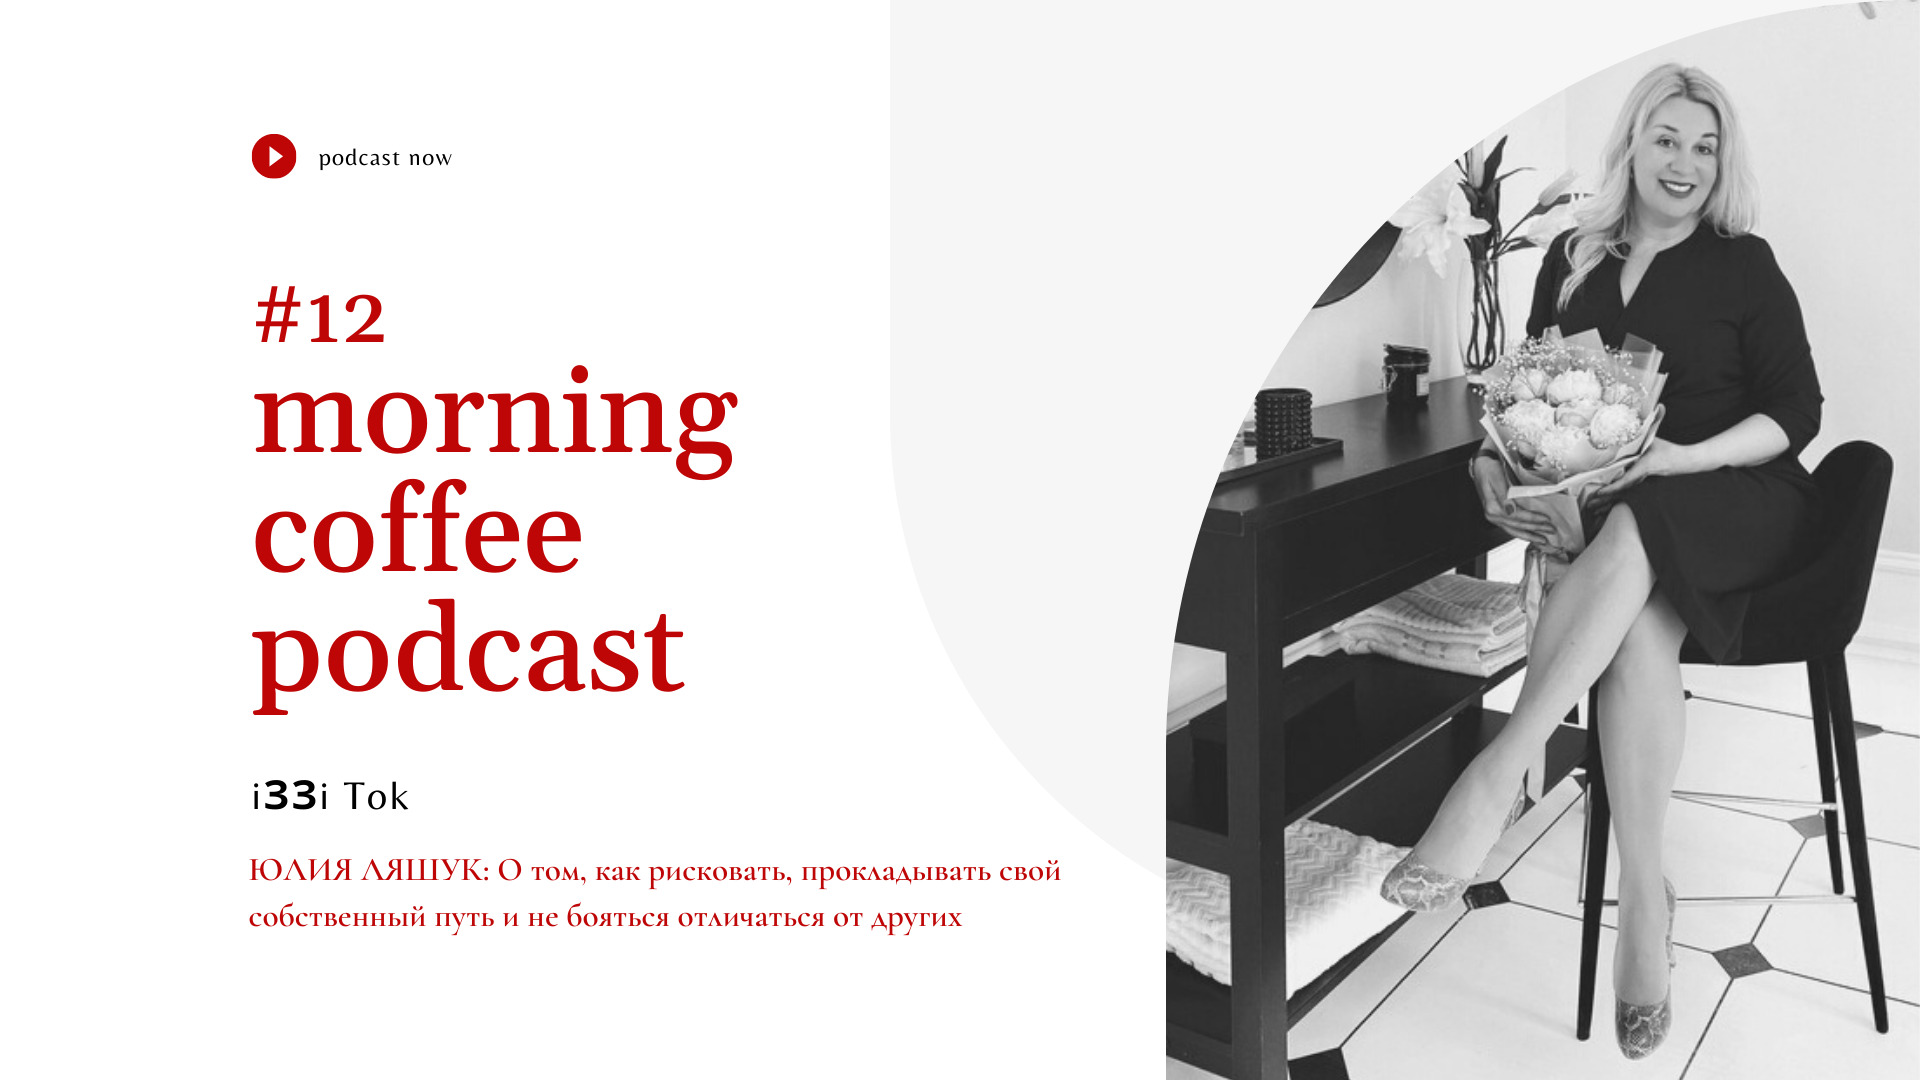 Morning Coffee Podcast _ CTj podcasts #12